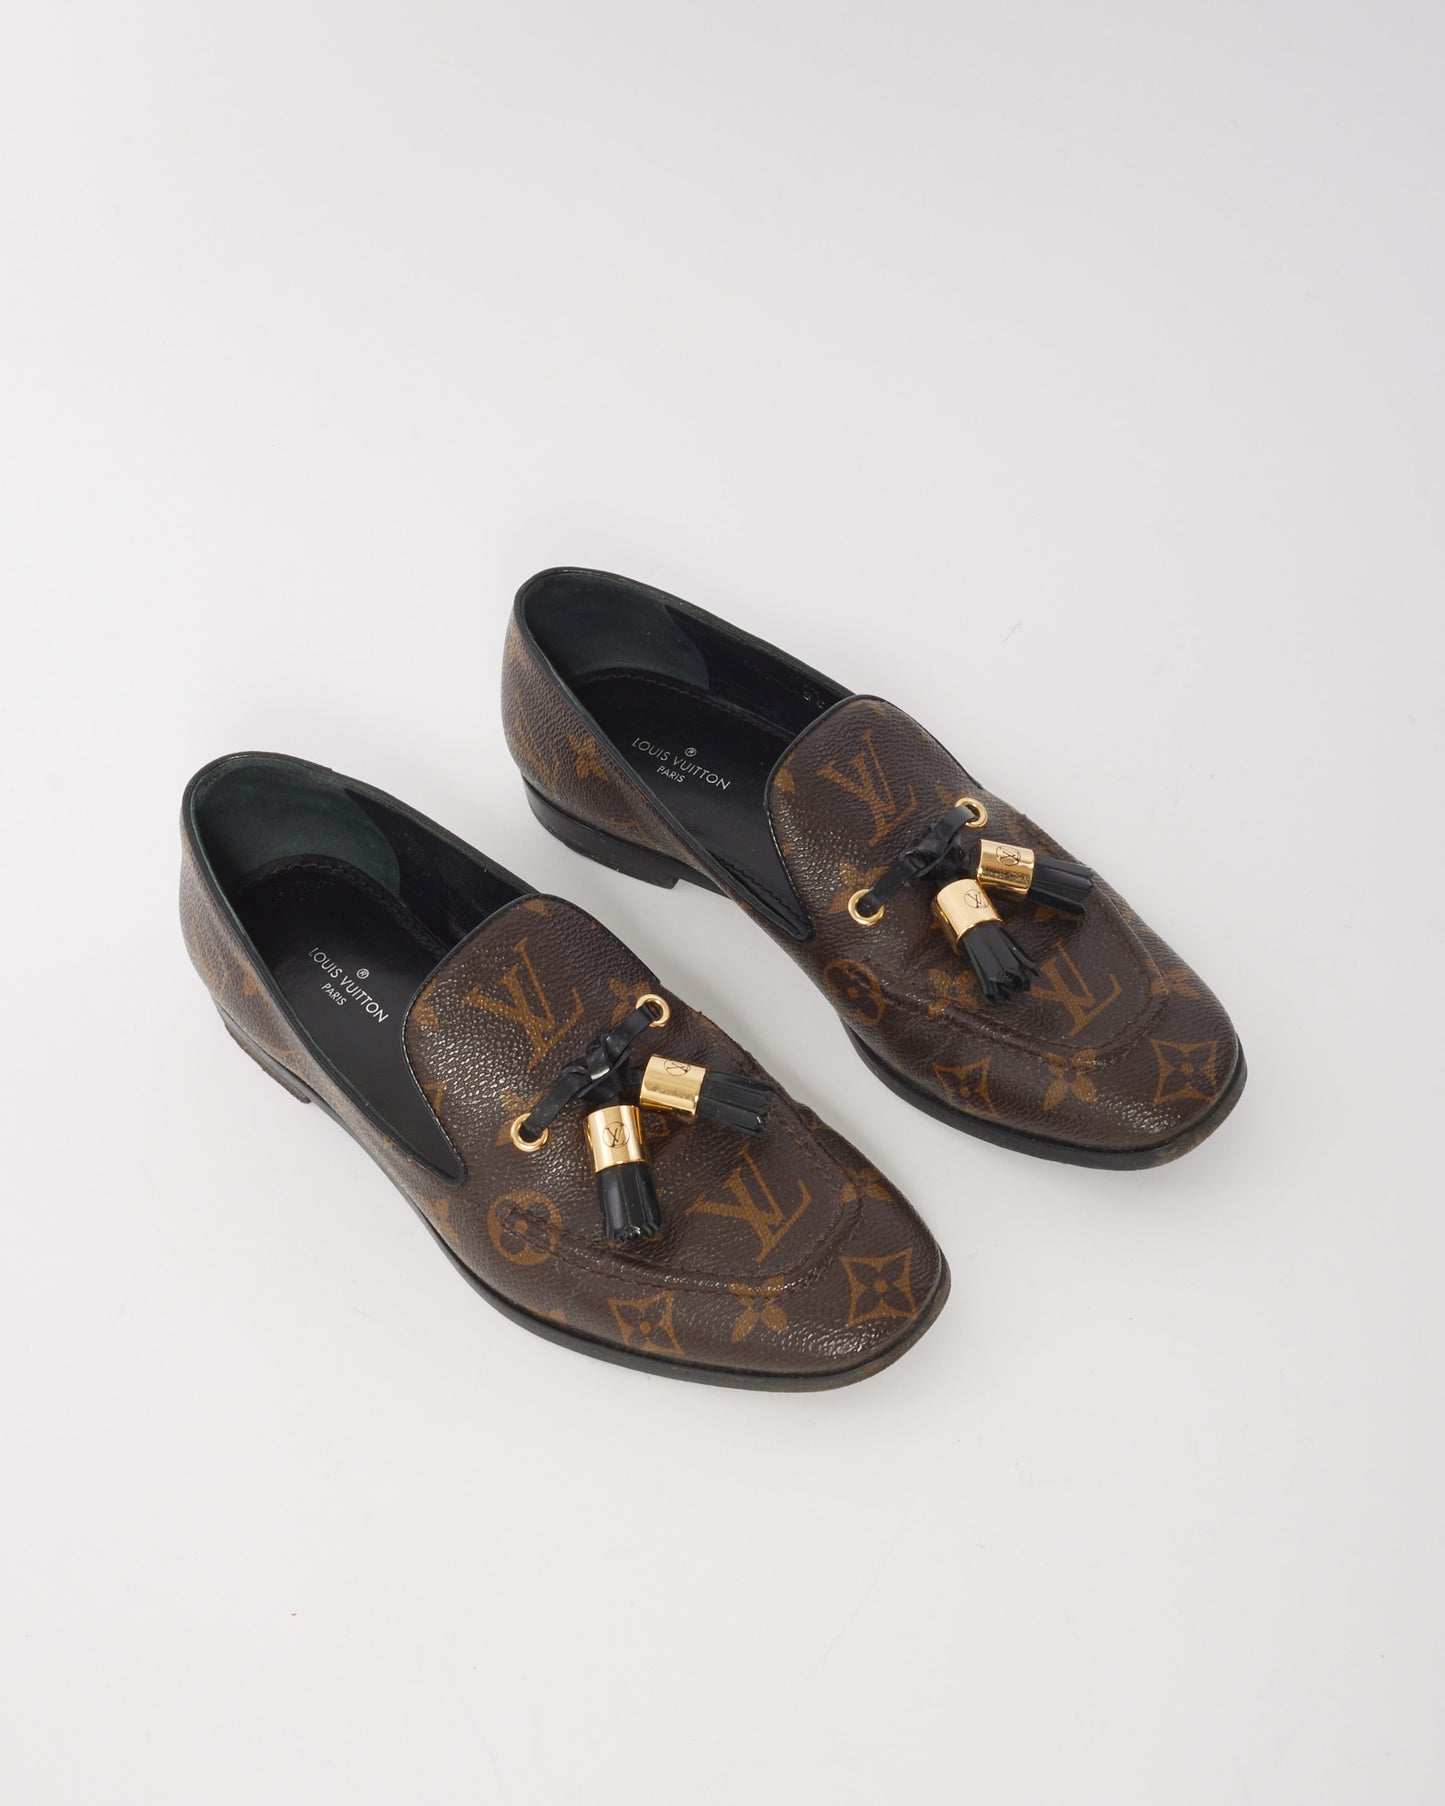 Louis Vuitton Monogram Canvas Society Loafers - 36